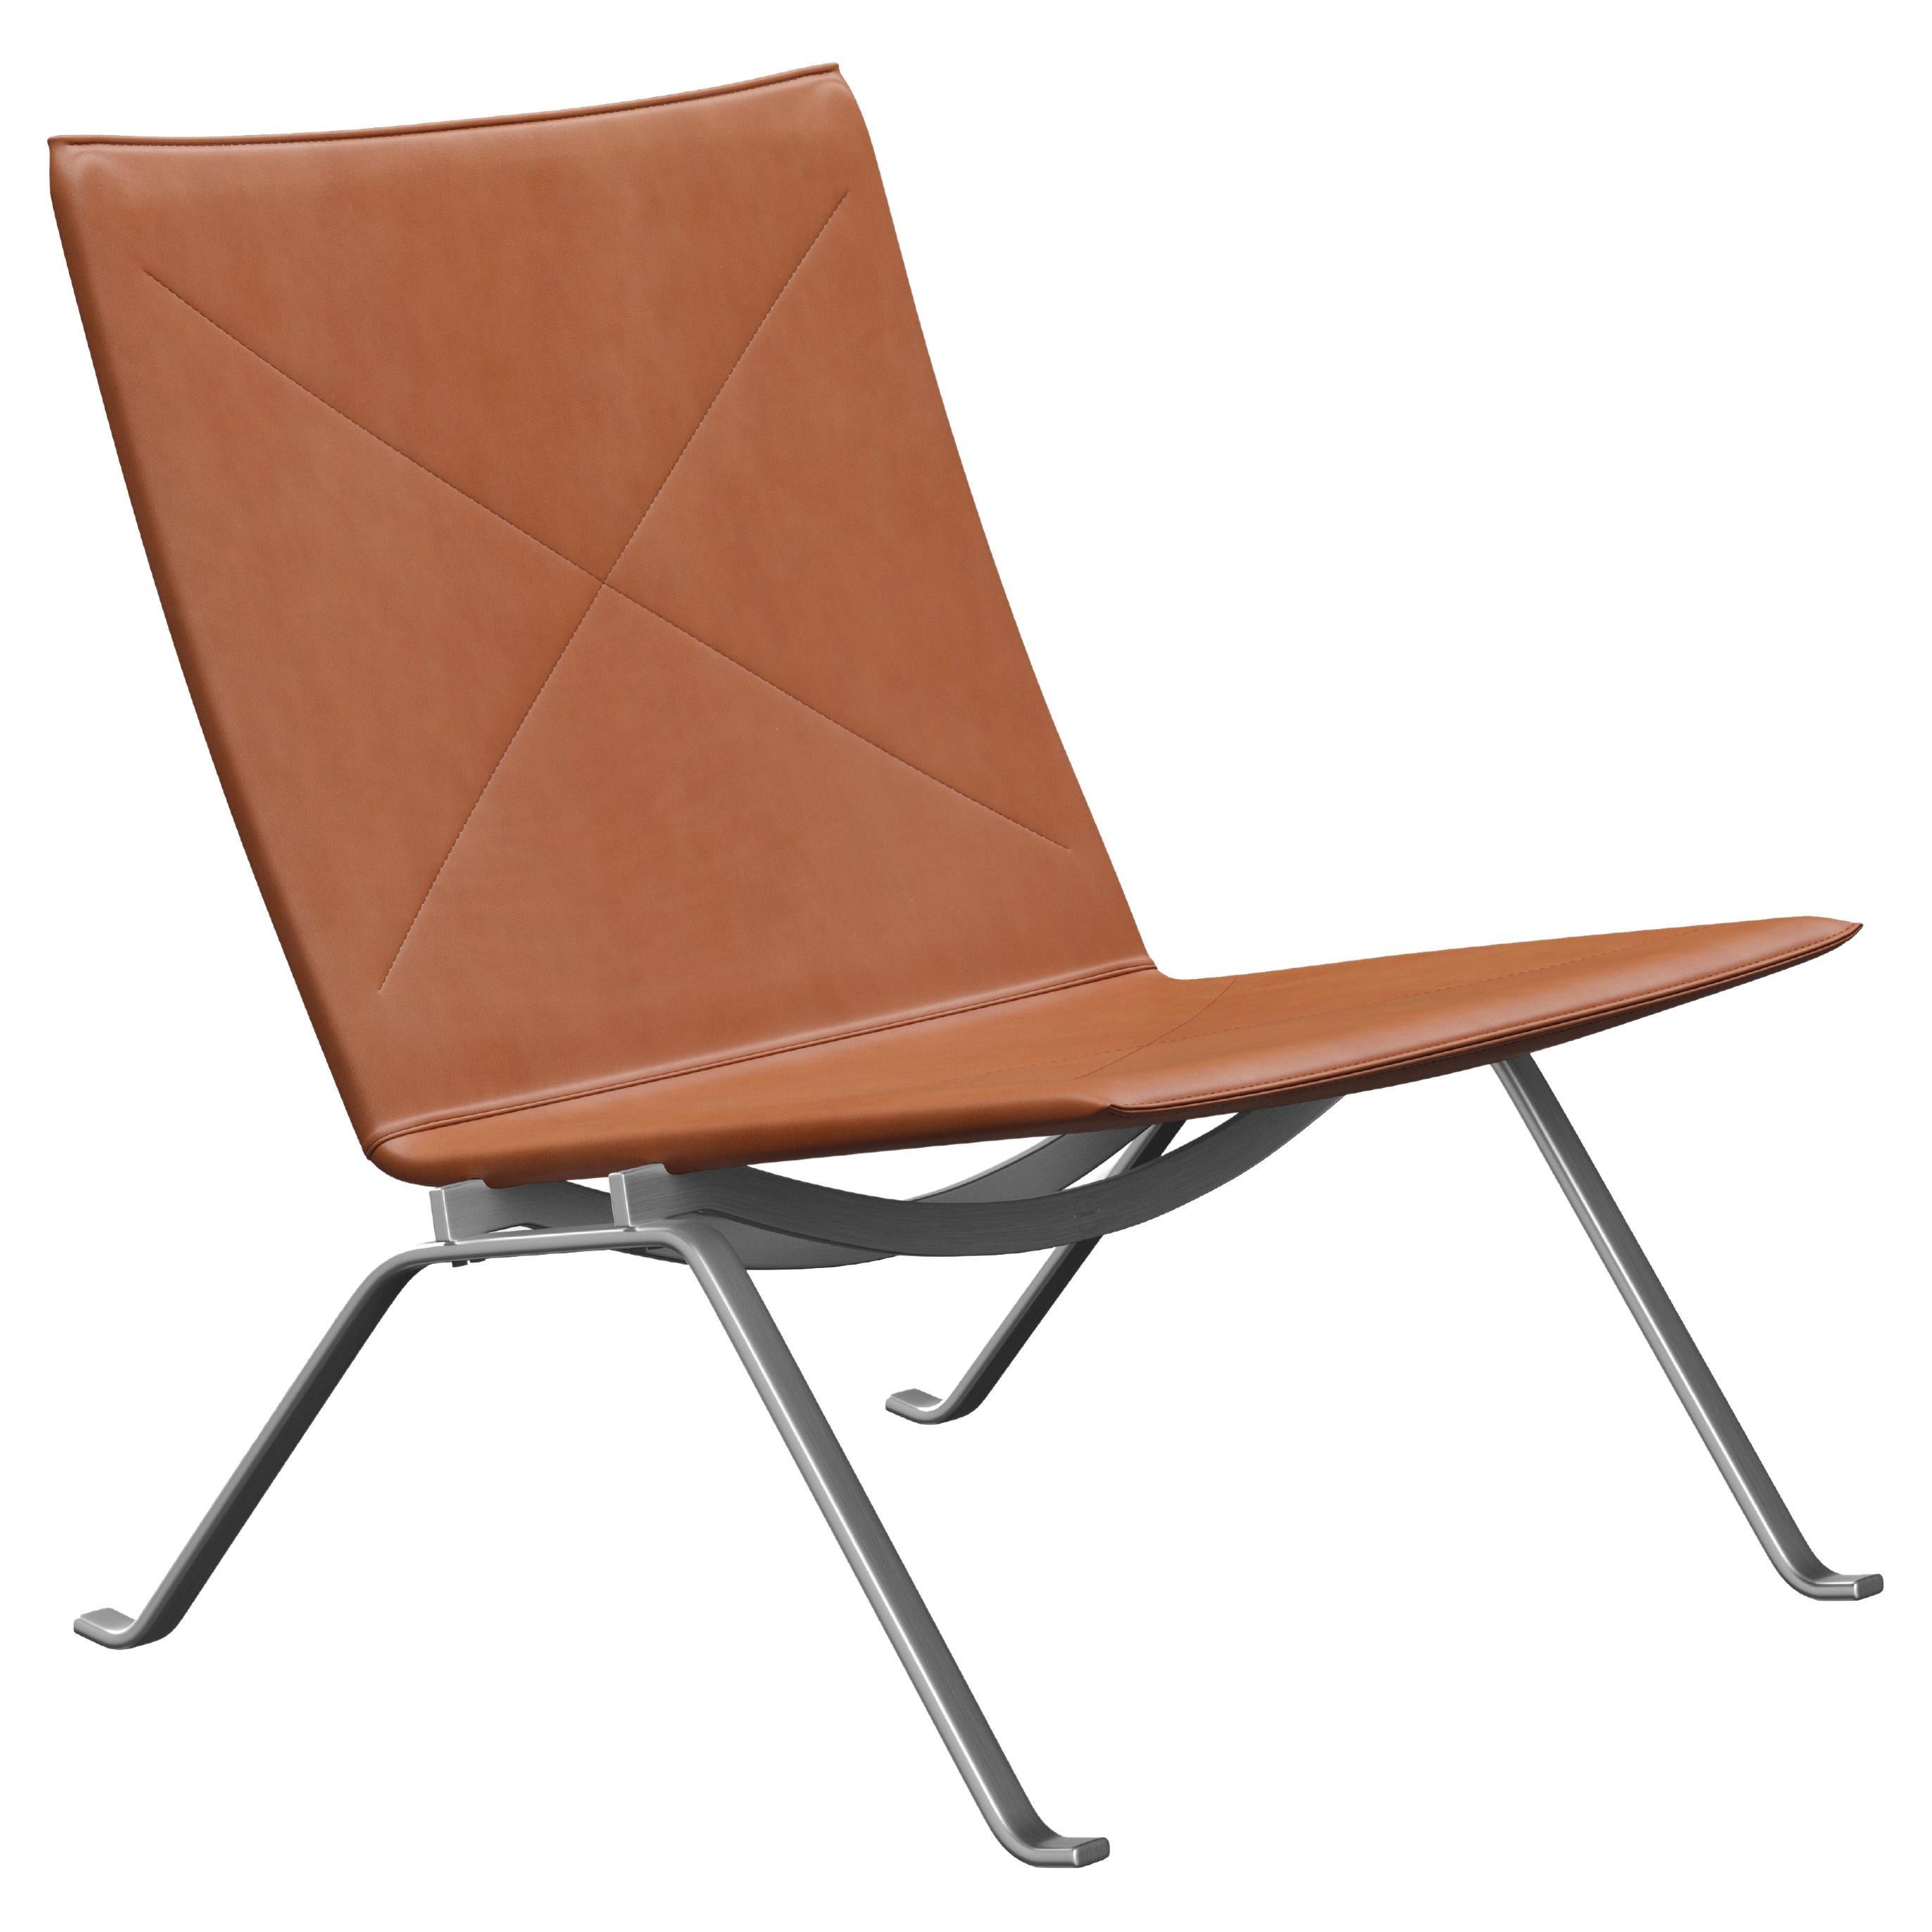 Poul Kjærholm 'PK22' Lounge Chair for Fritz Hansen in Leather (Cat. 5) For Sale